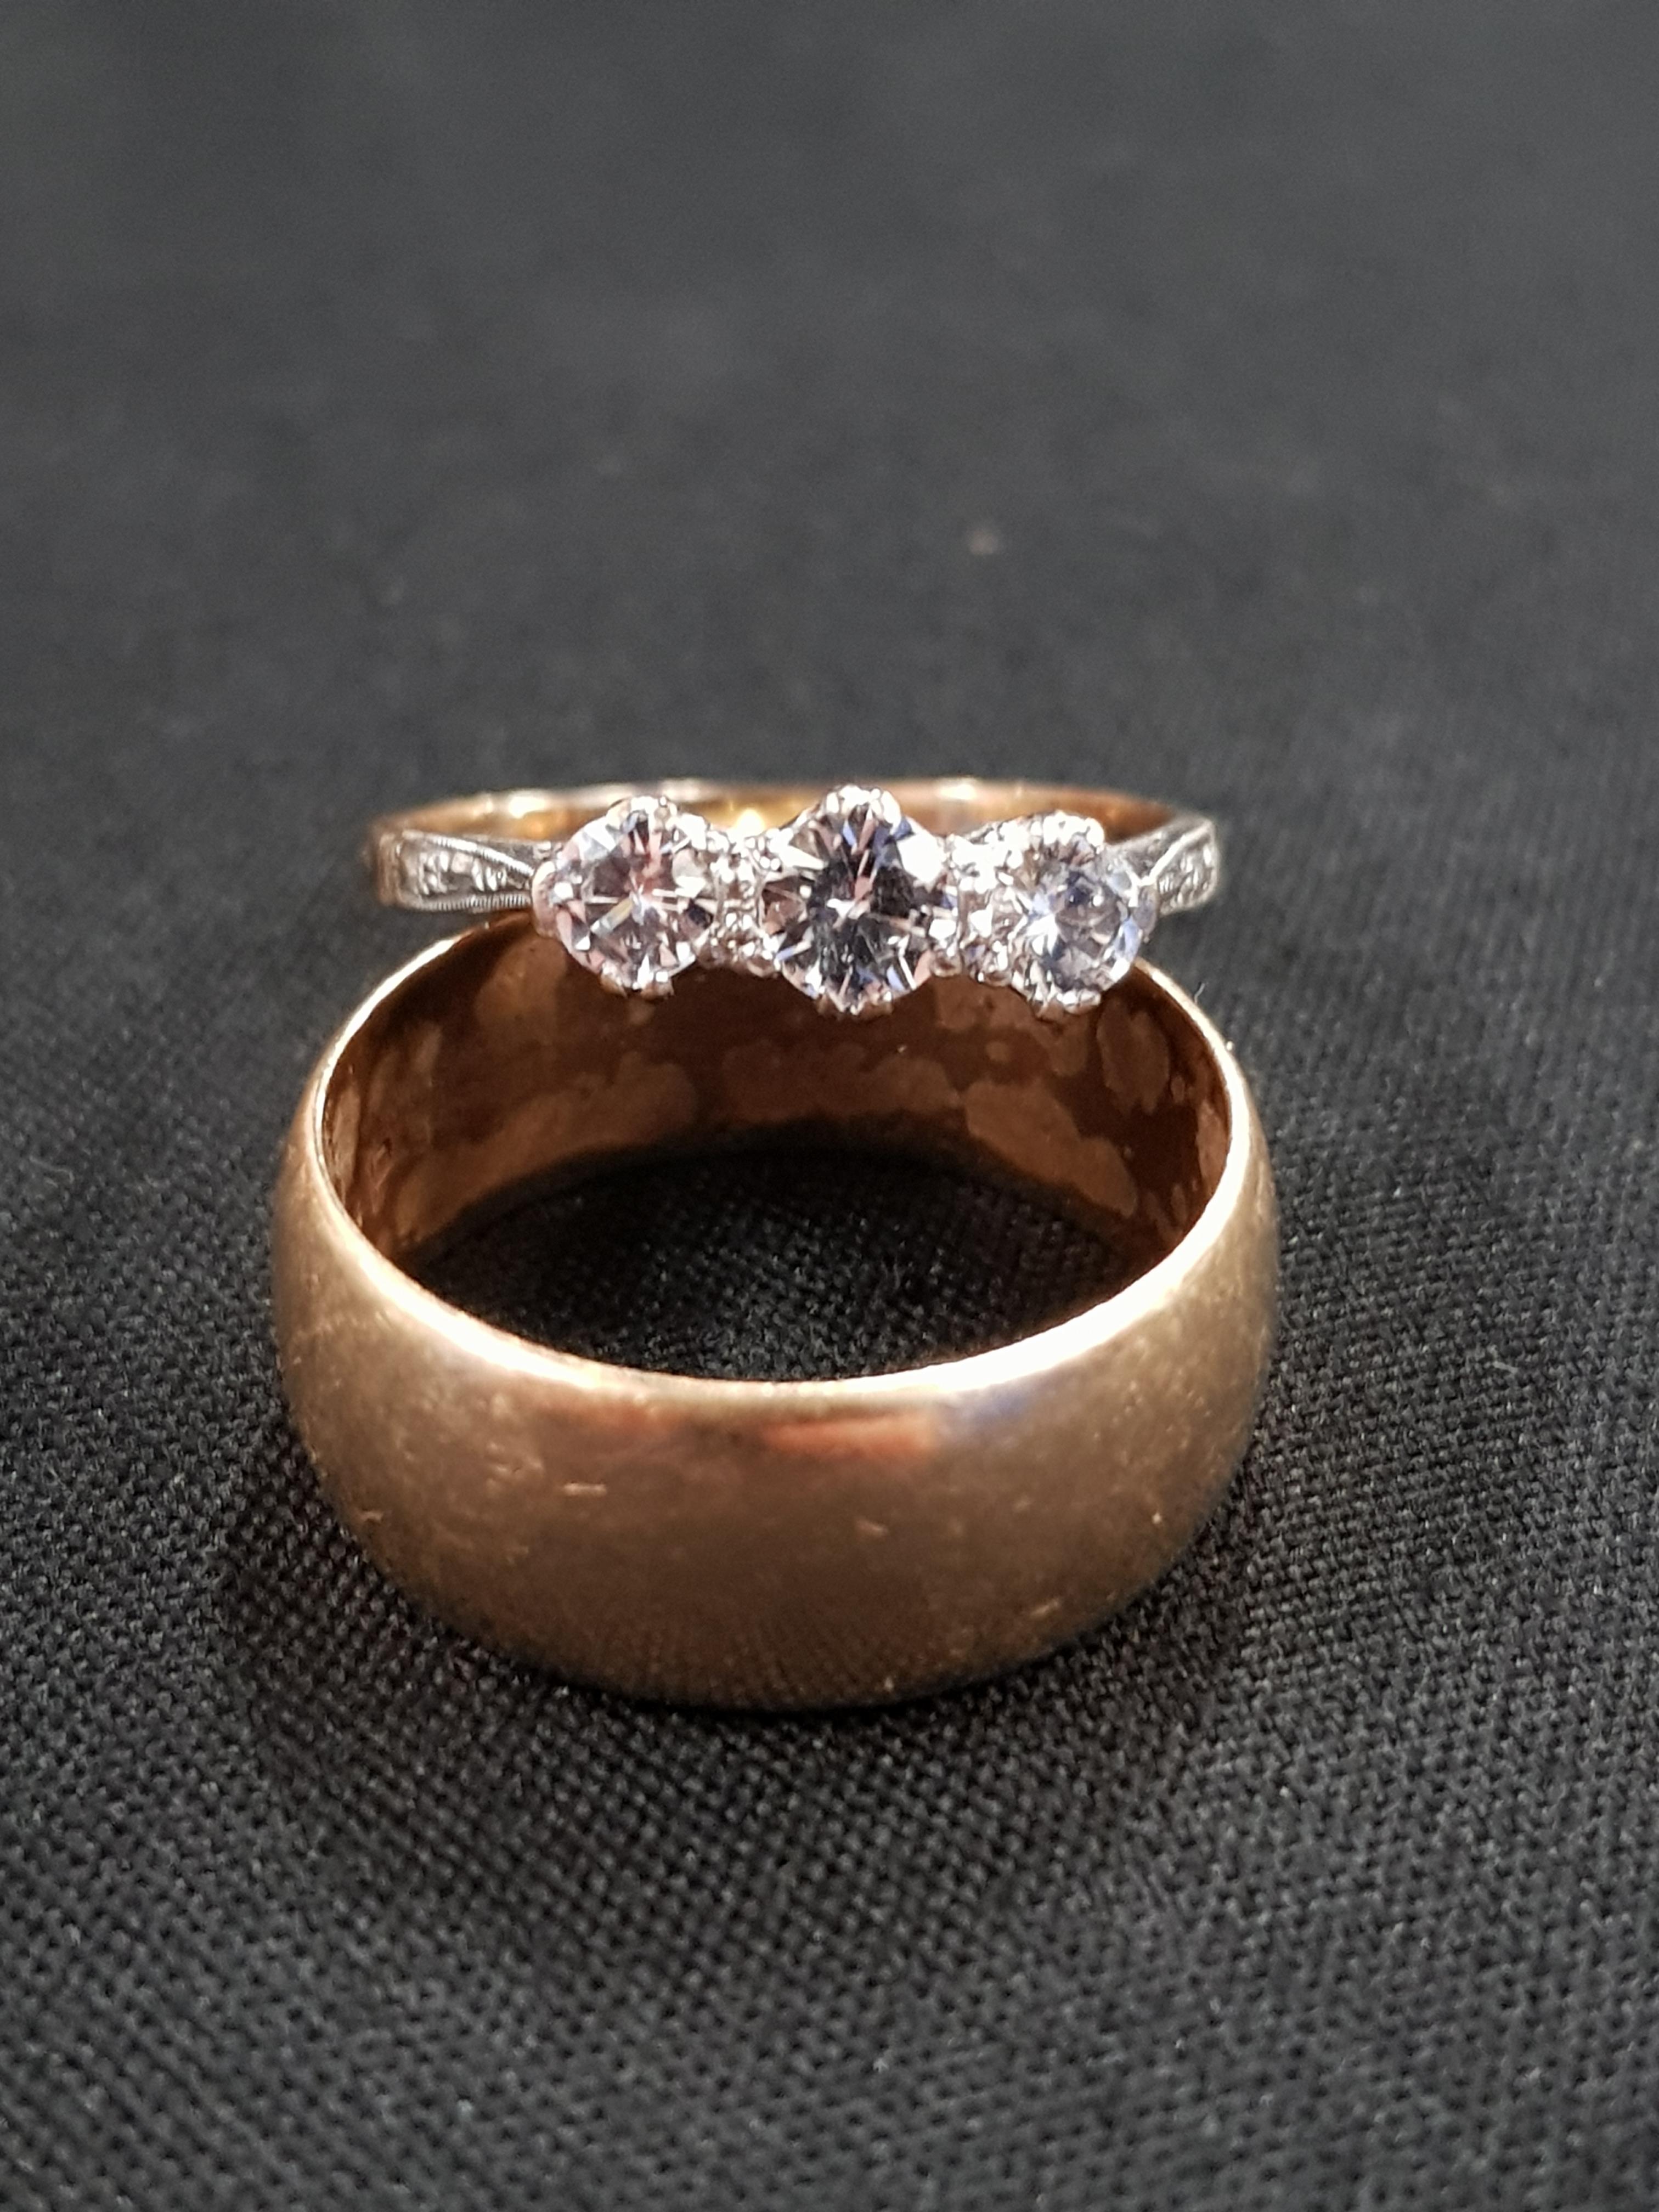 9CARAT WEDDING BAND (6GMS) AND ENGAGEMENT RING